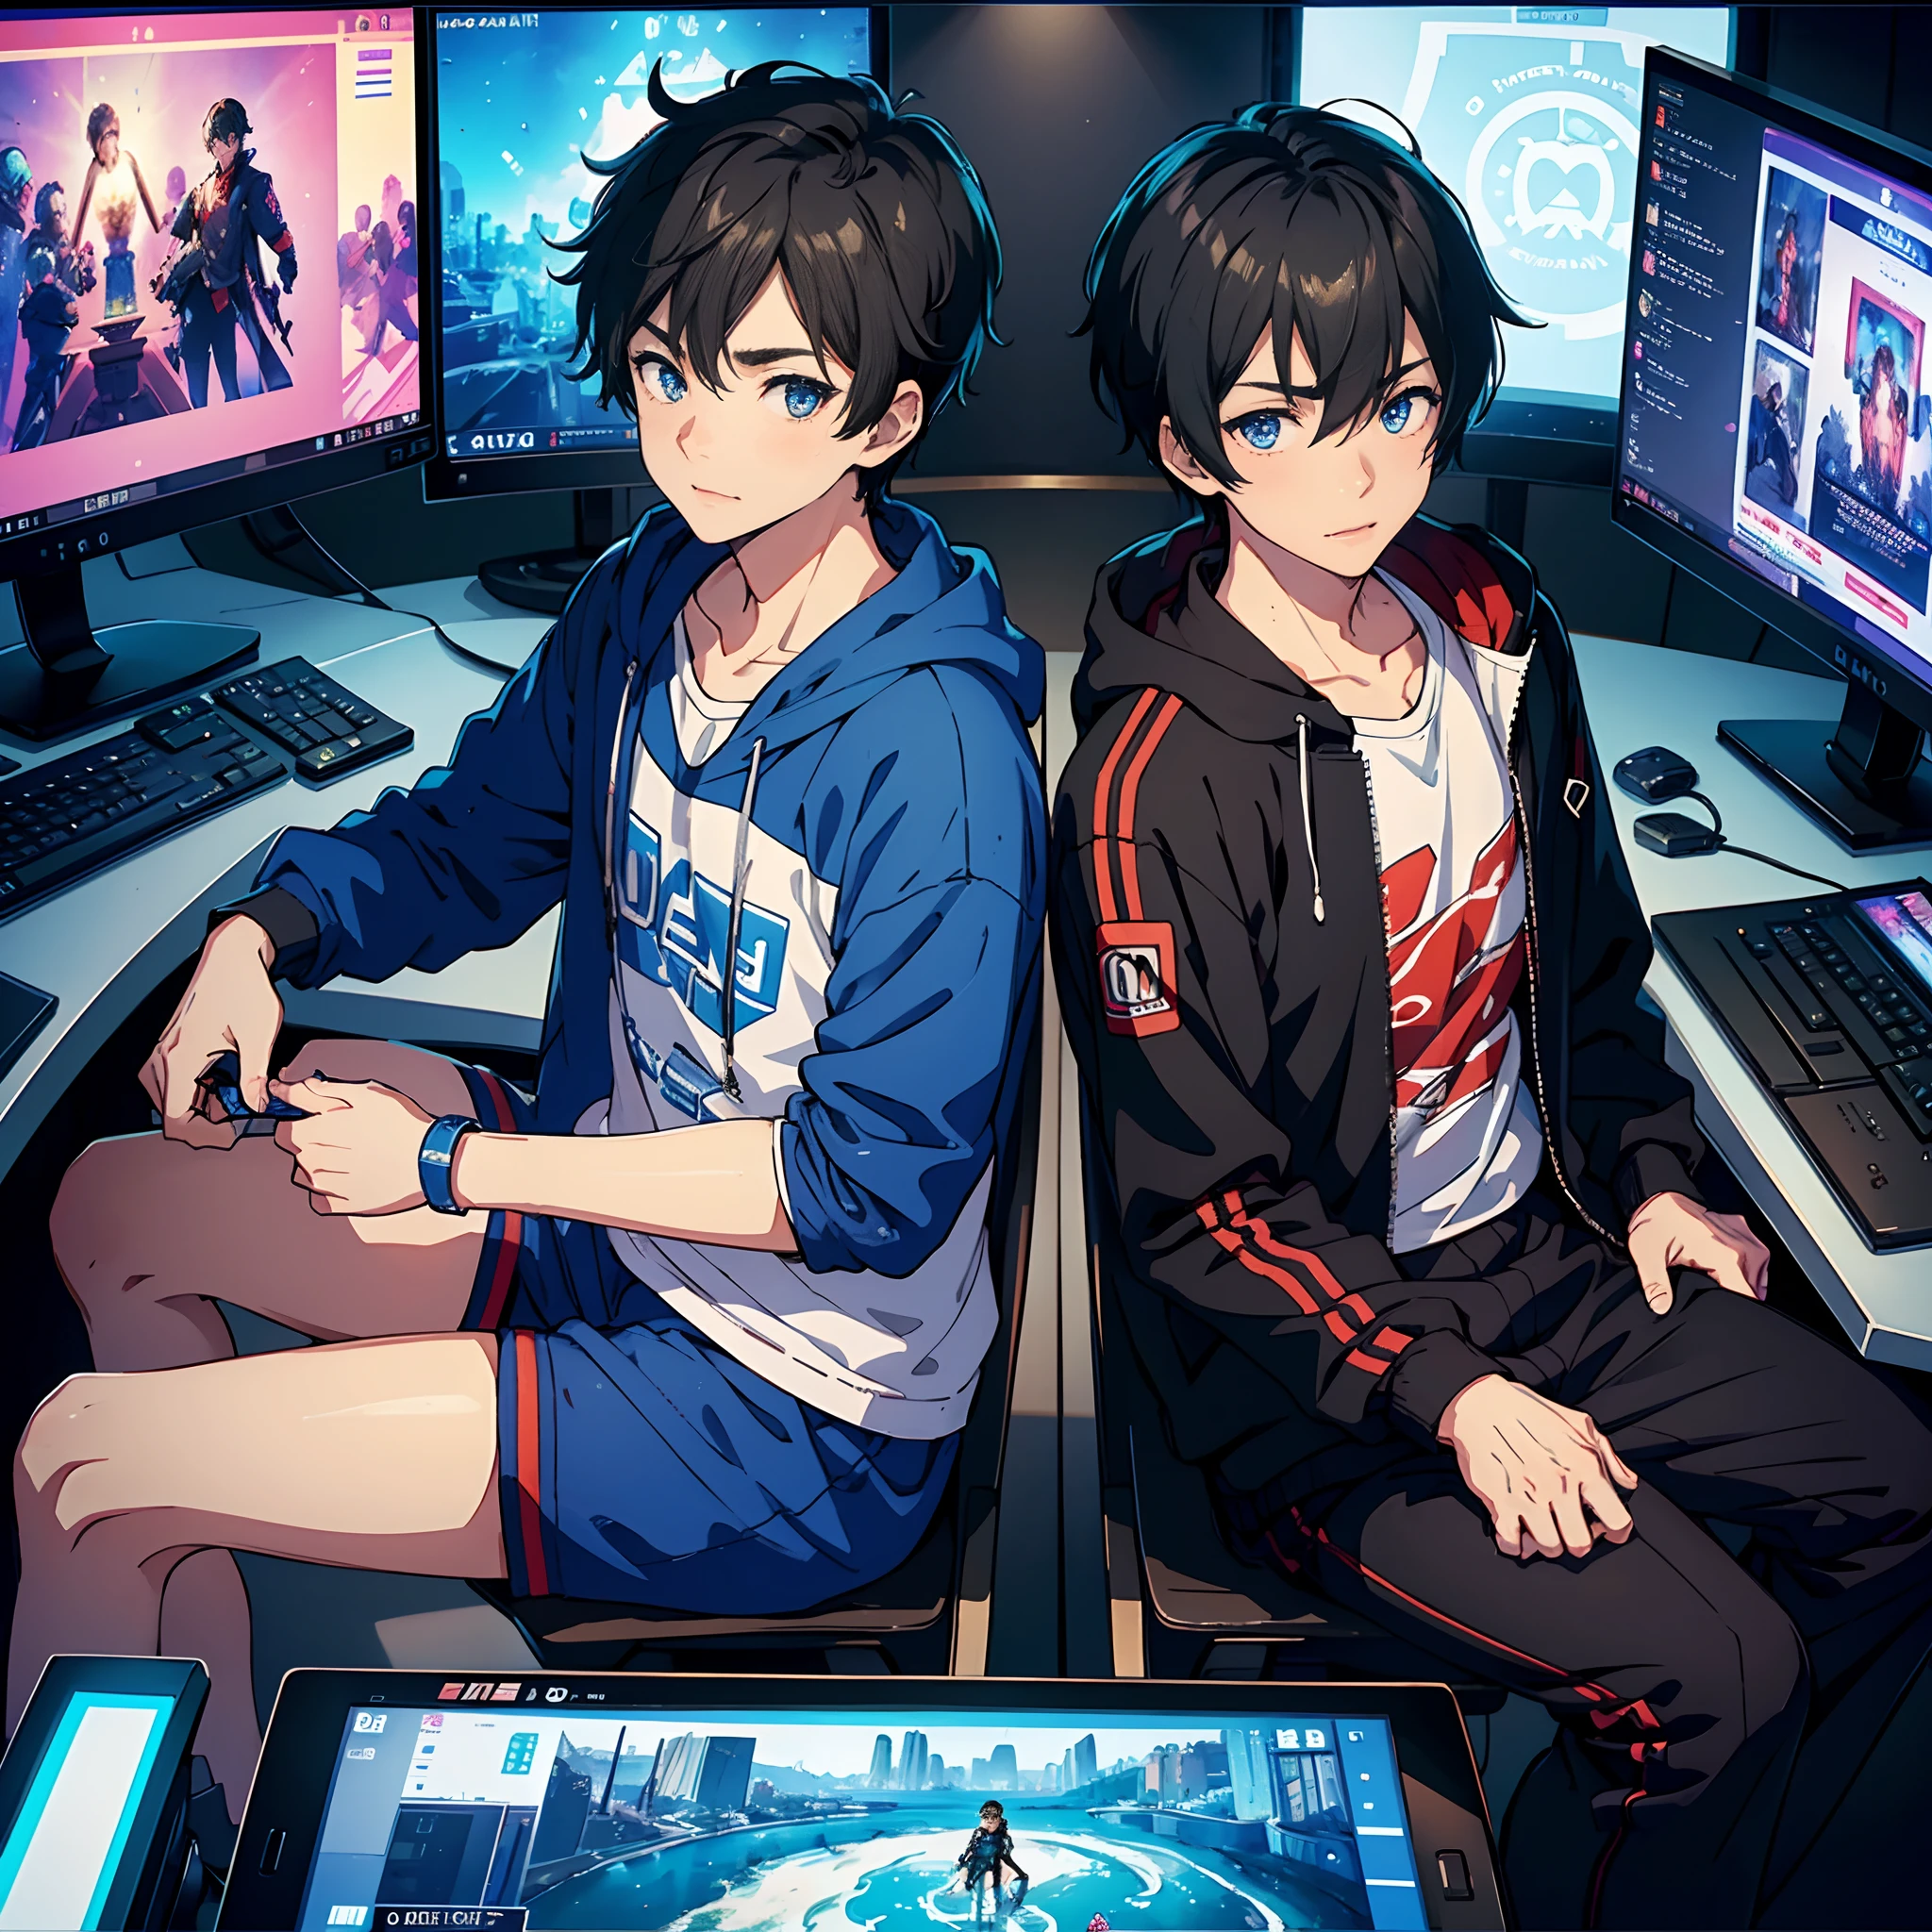 Best Quality: 1.0), (超A high resolution: 1.0), 2boy,gay relationship,Anime Boy, Short black hair, Blue eyes, Sit in front of the computer and play games, background in the esports room,